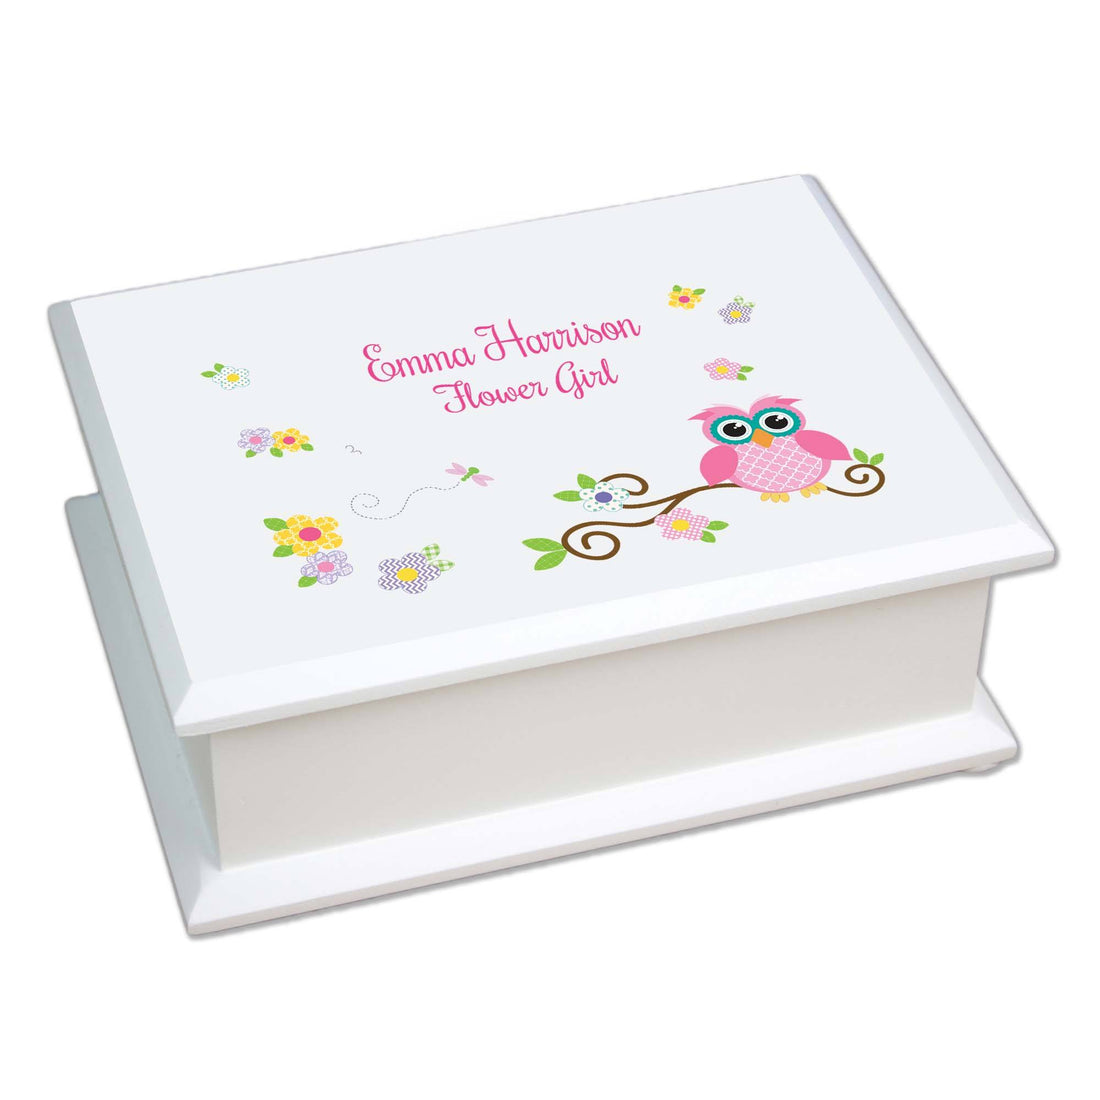 Personalized Lift Top Jewelry Box with Pink Owl design